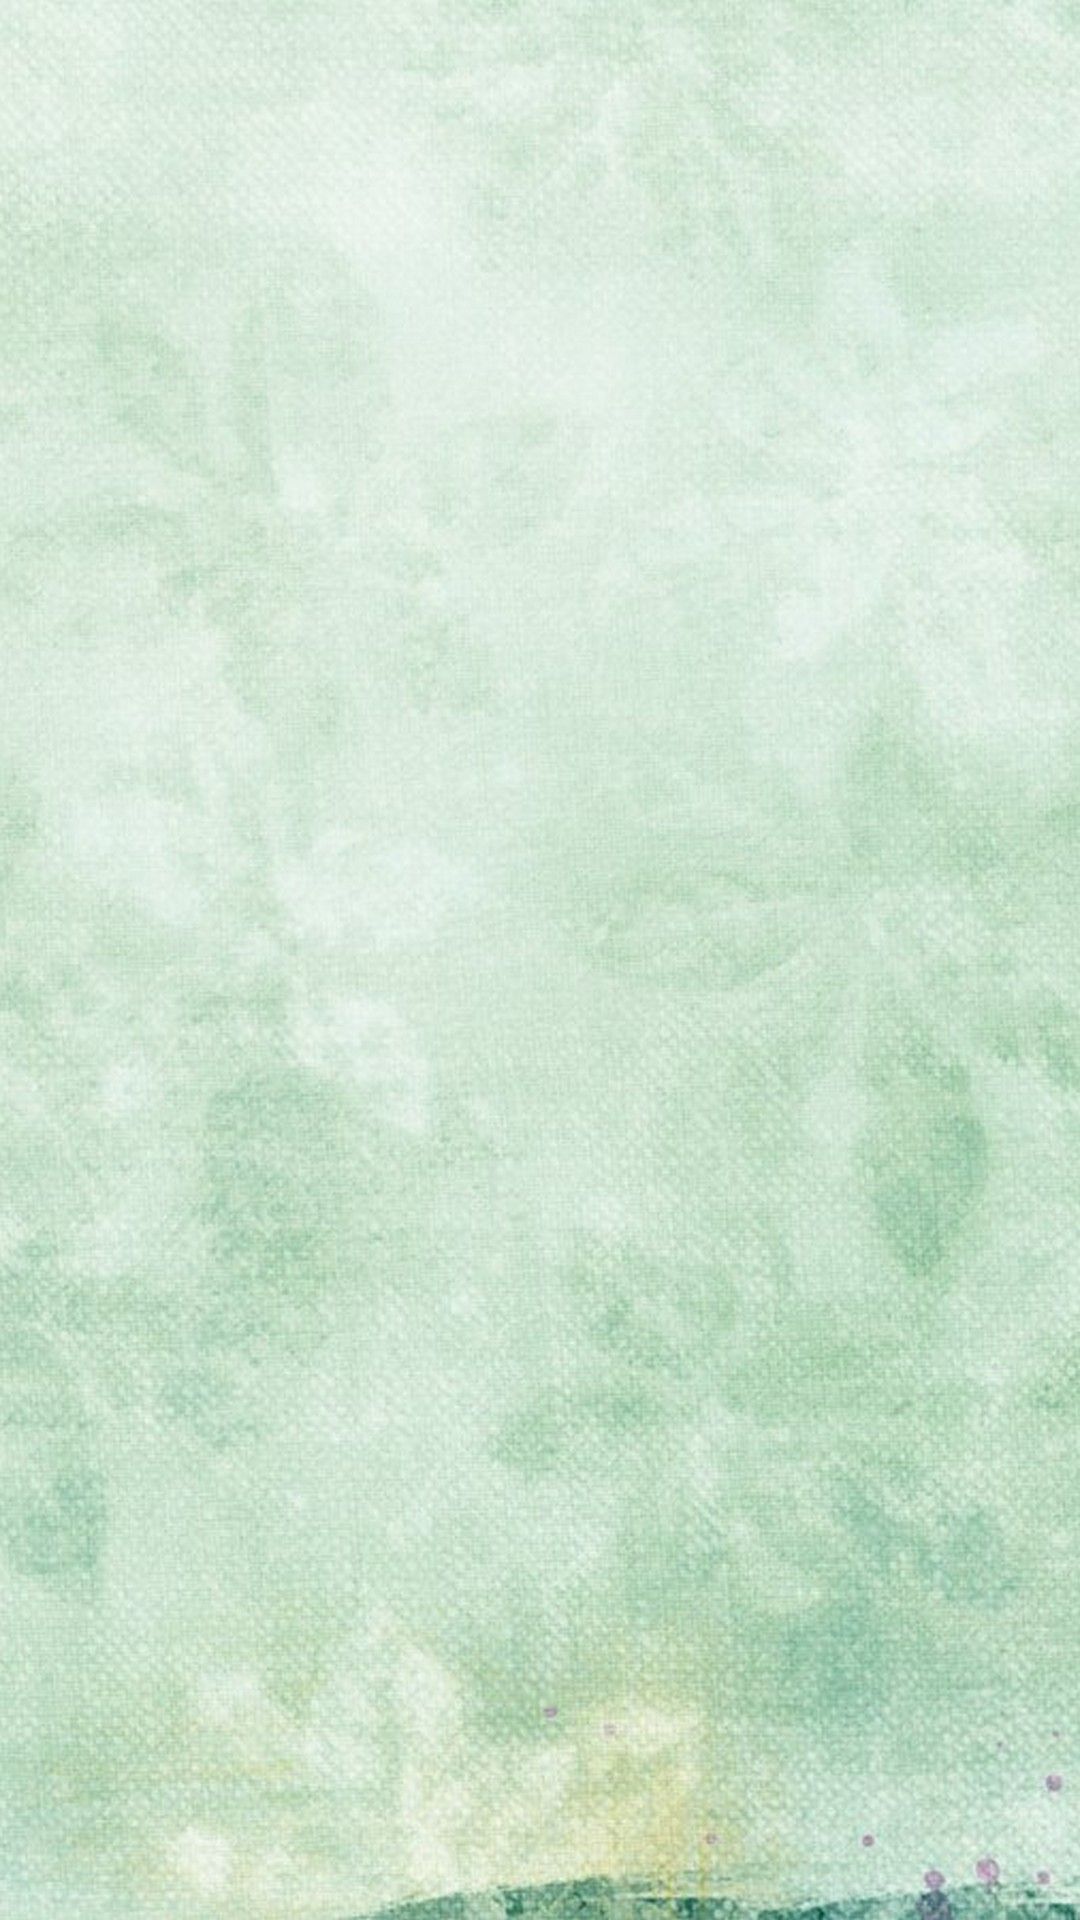 Green And Gold Phone Wallpaper. Mint green wallpaper iphone, Mint green wallpaper, Mint green background